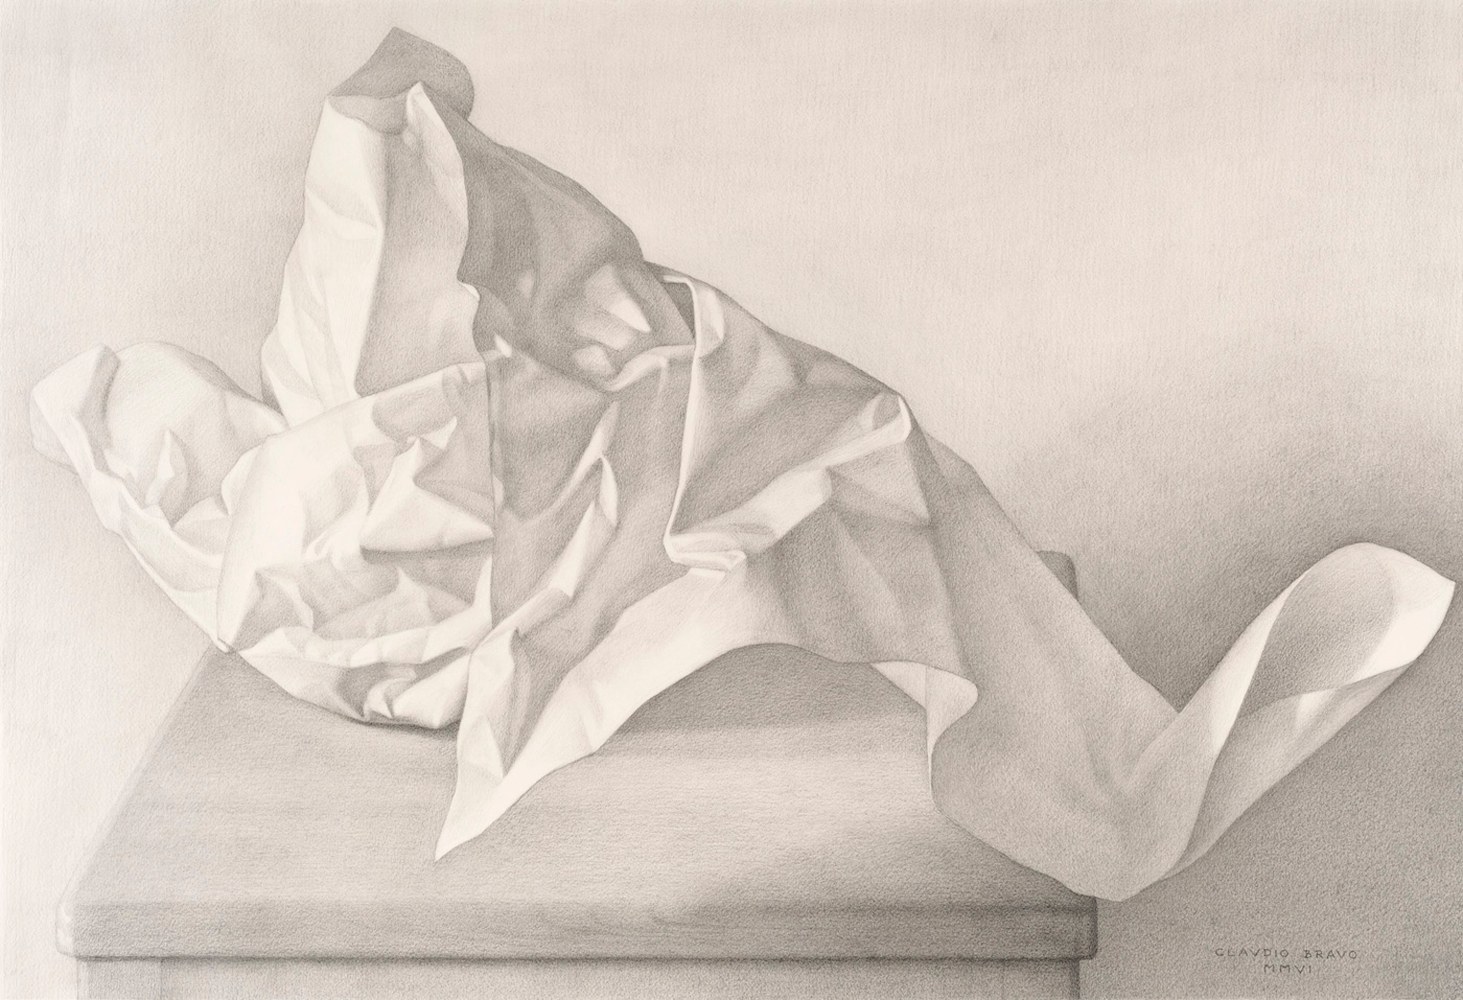 Claudio Bravo
Papel blanco, 2006
pencil on paper
20 3/8 &amp;times; 29 1/2 in. / 51.8 &amp;times; 74.9 cm